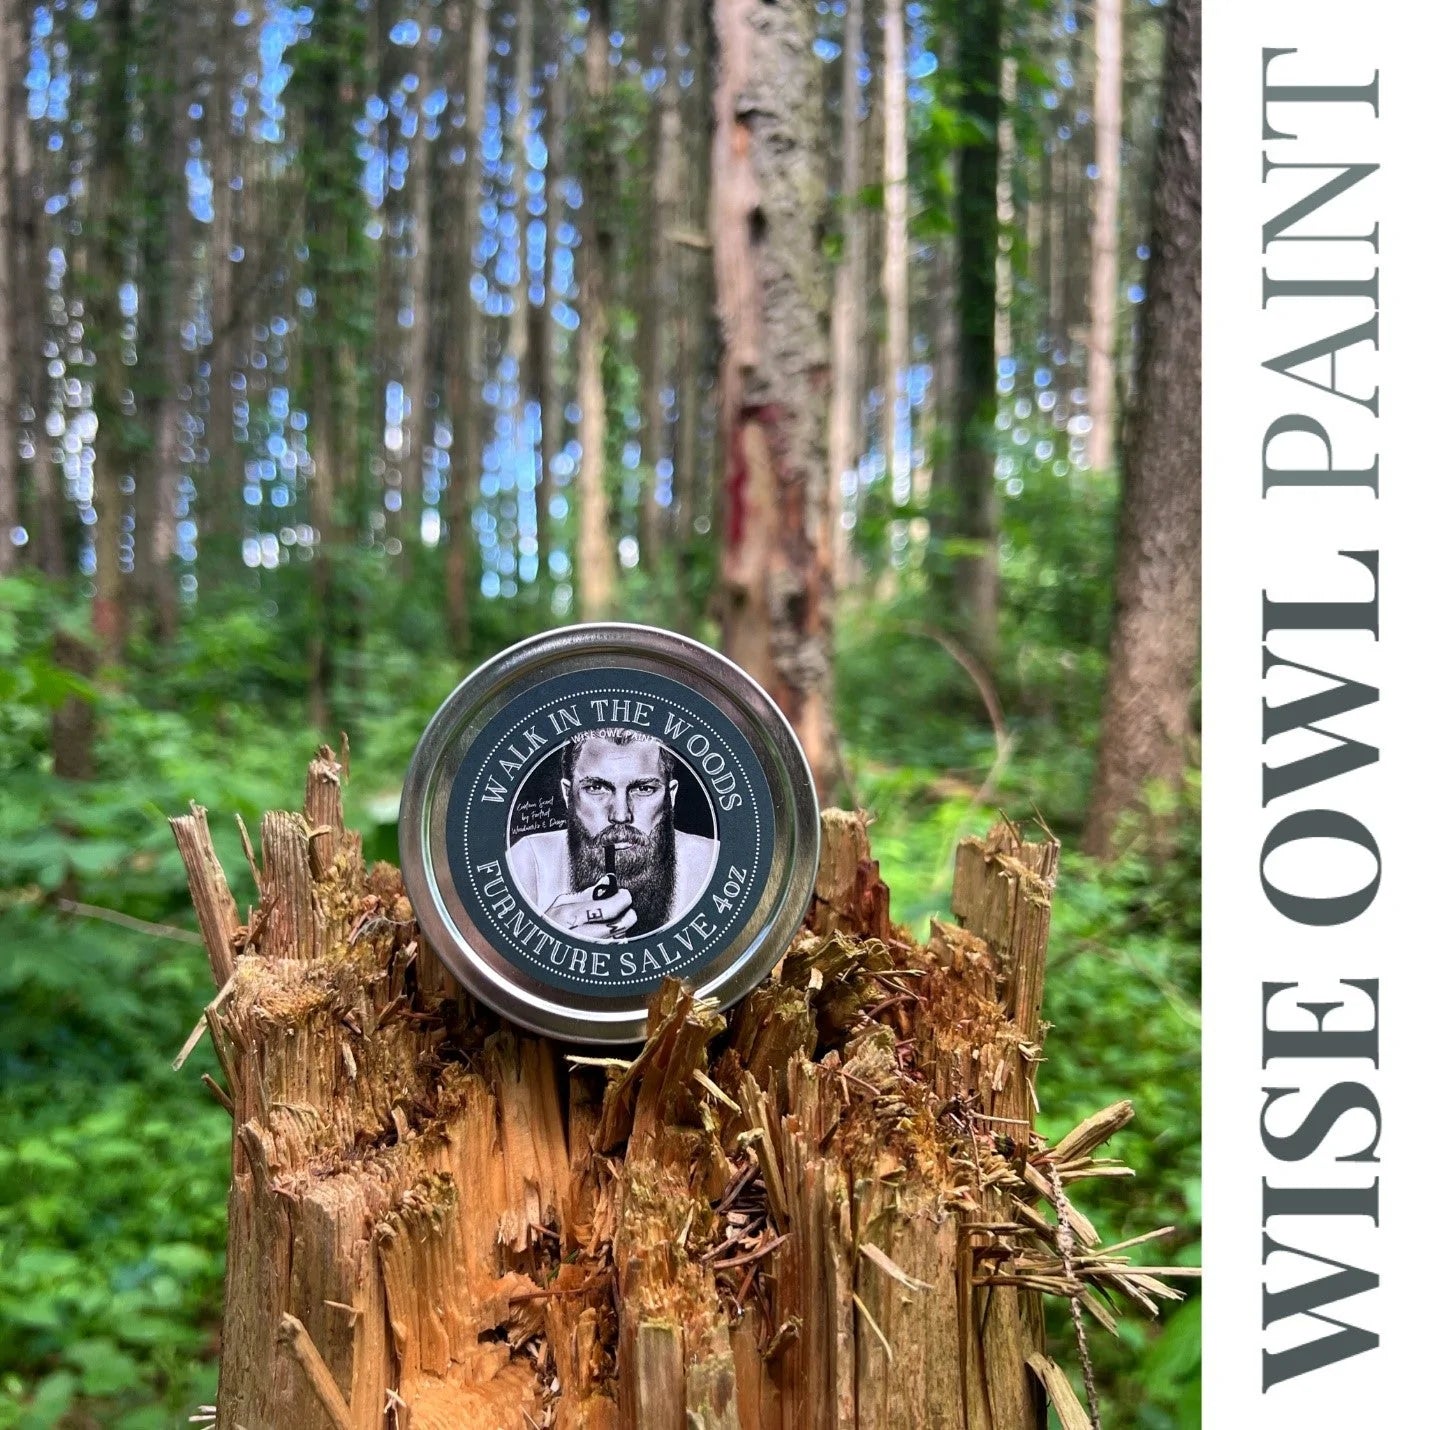 Wise Owl Funiture Salve - Walk in the Woods